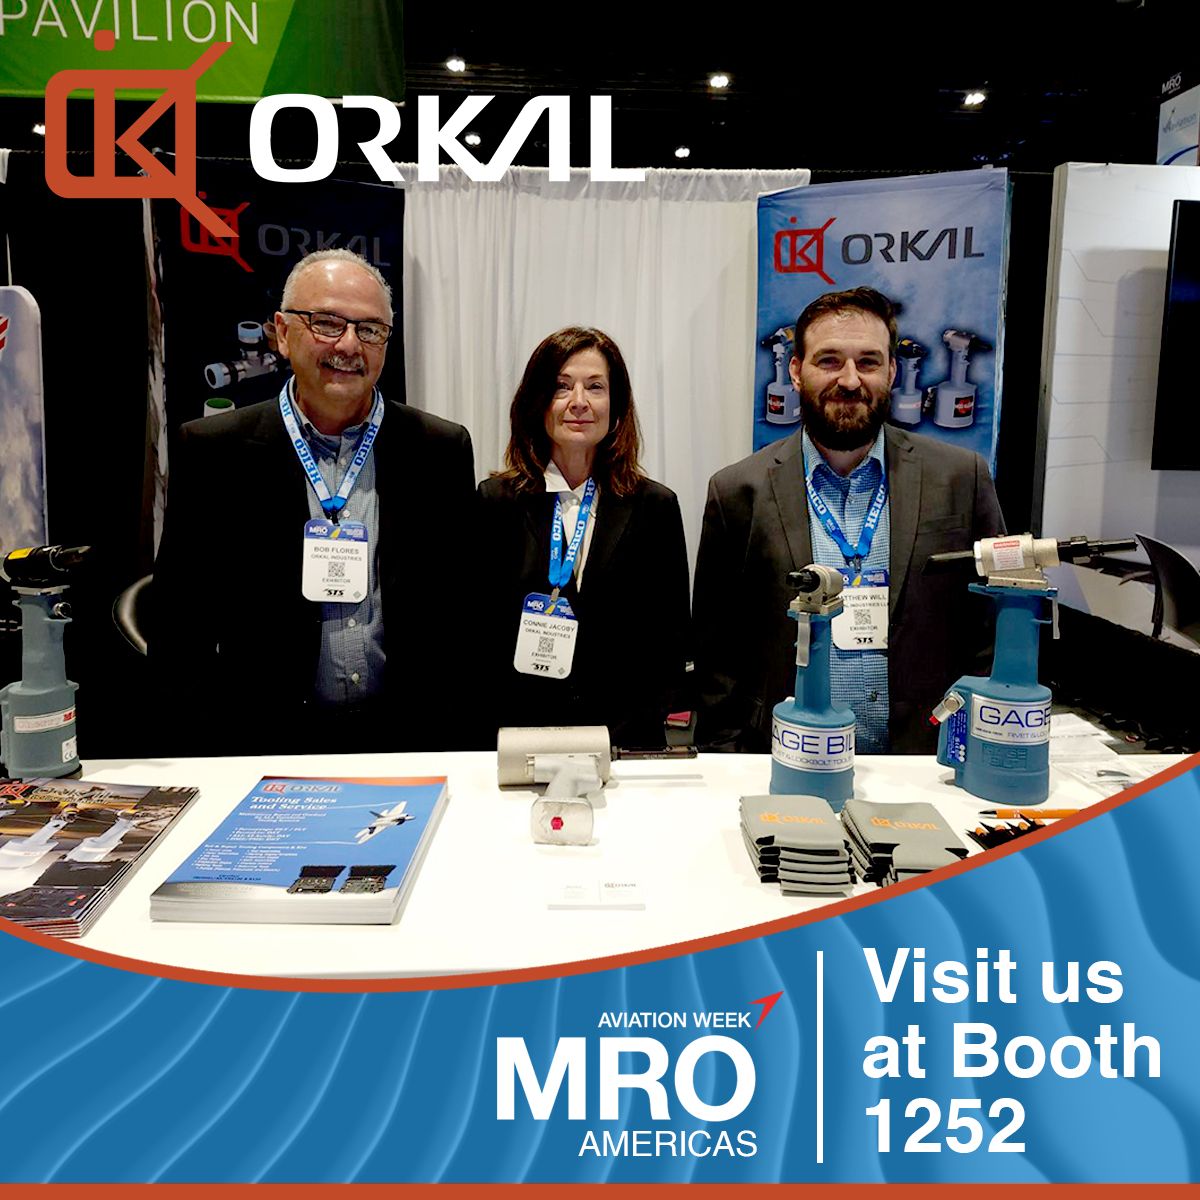 orkal, orkal industries professionals display aviation fluid fittings, tooling services, repair procedures and logistic support at the mro americas event.